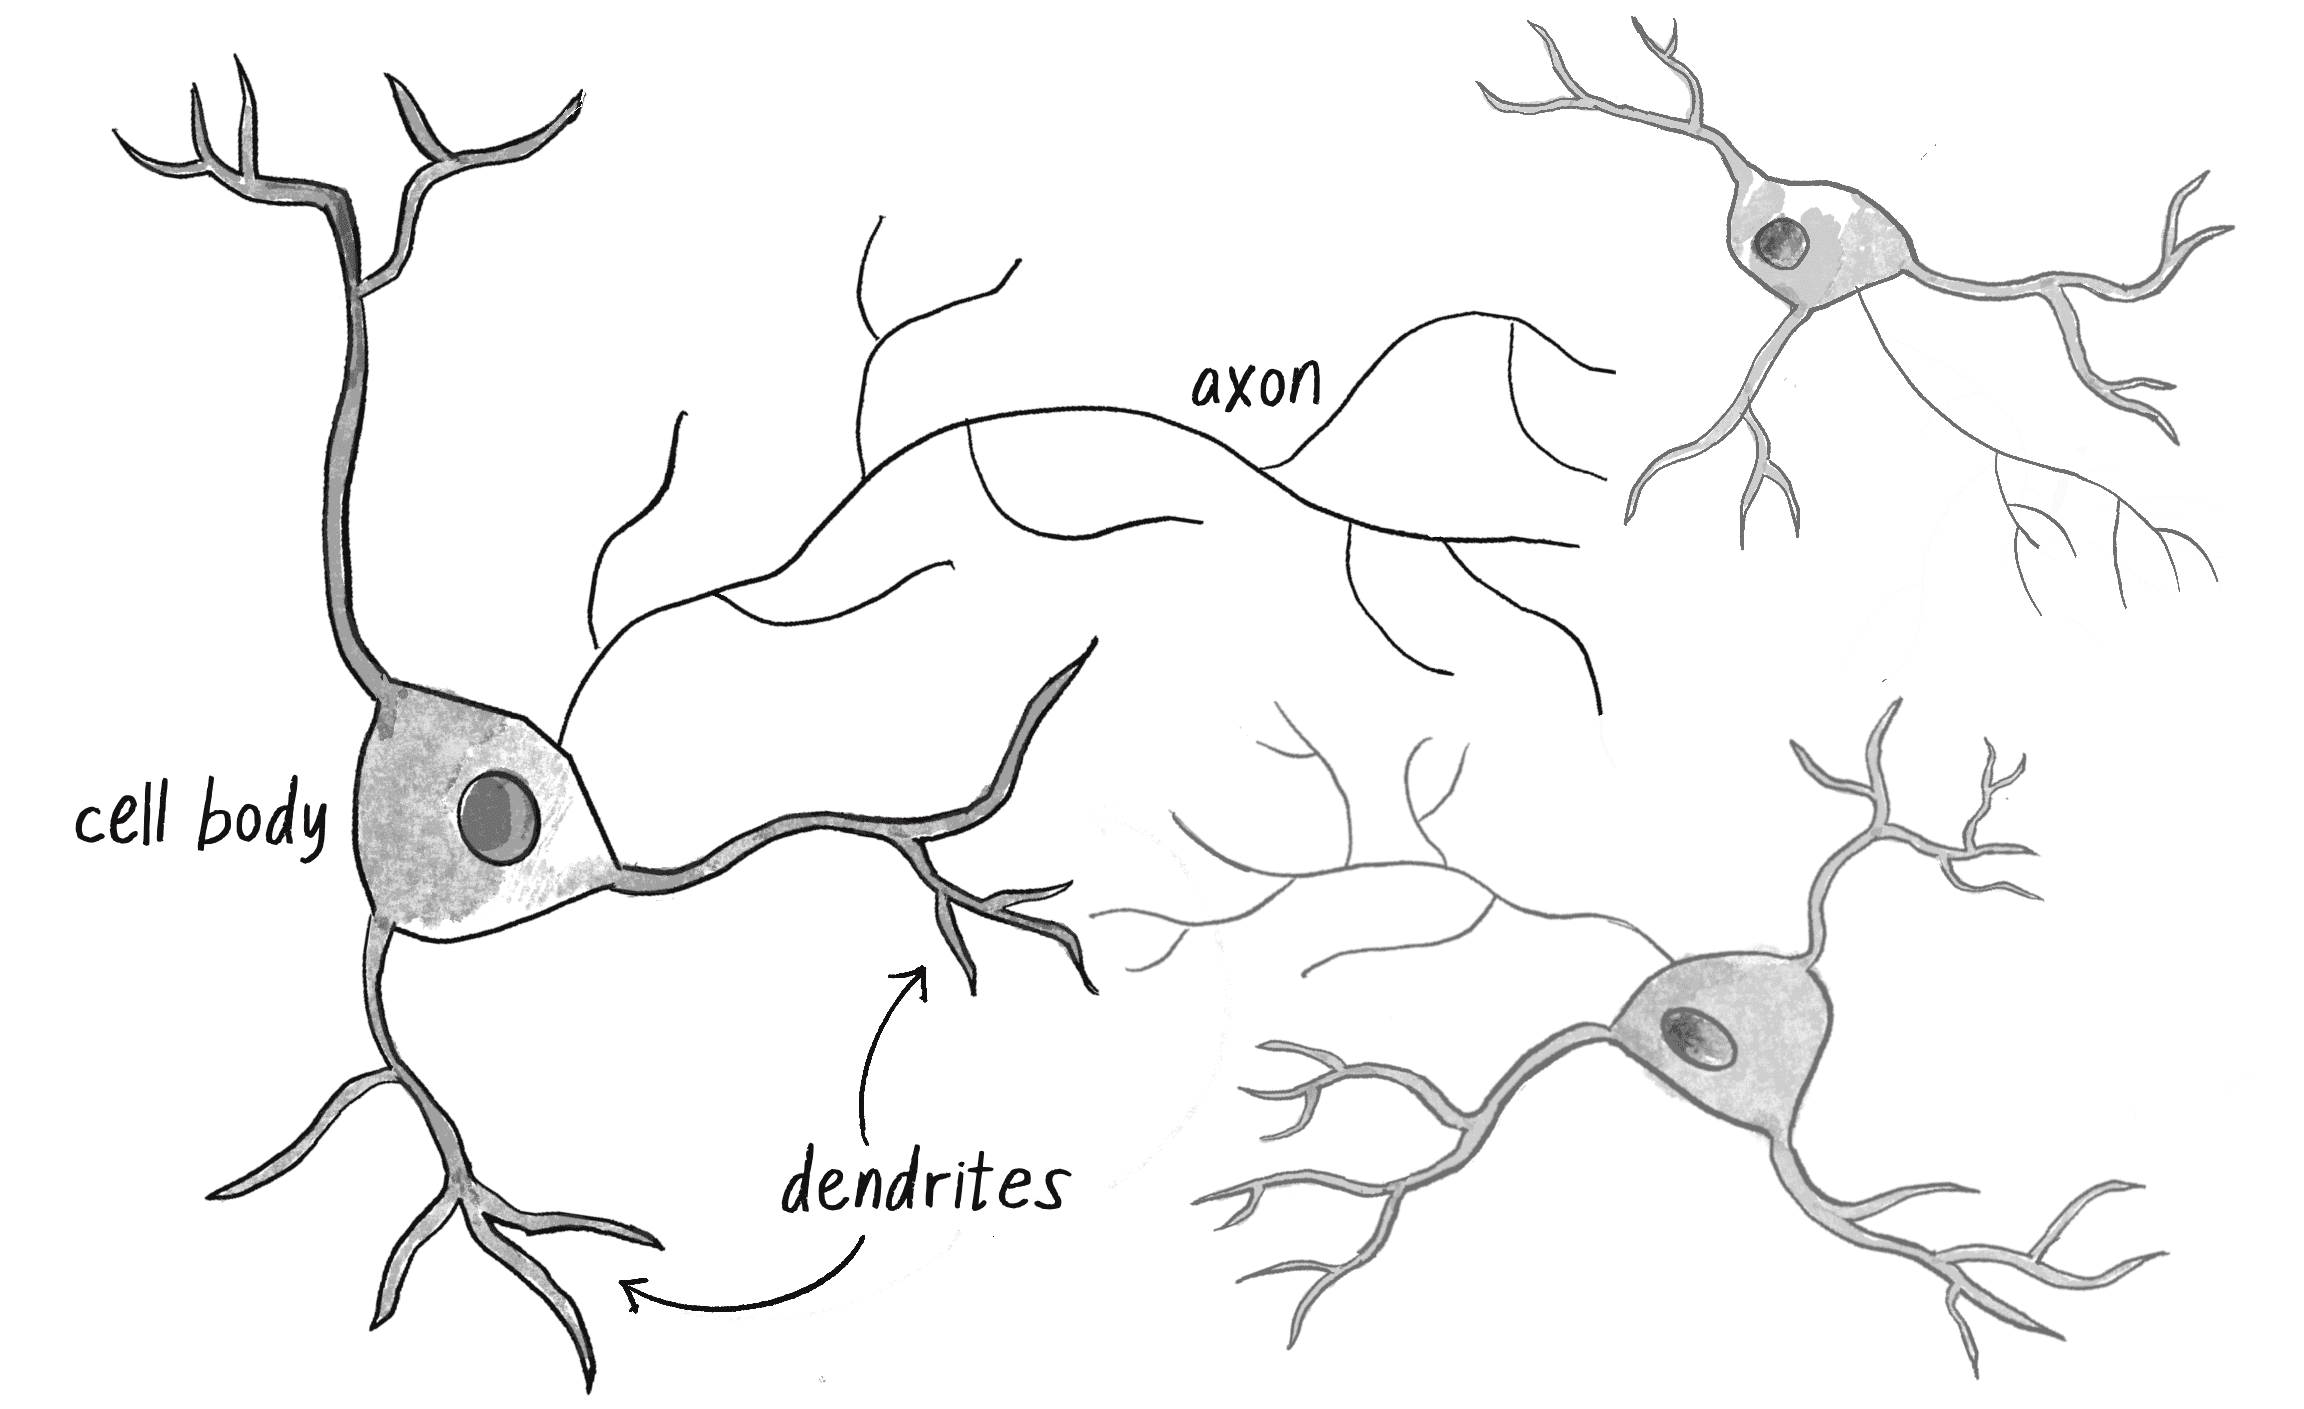 Figure 10.1 An illustration of a neuron with dendrites and an axon connected to another neuron